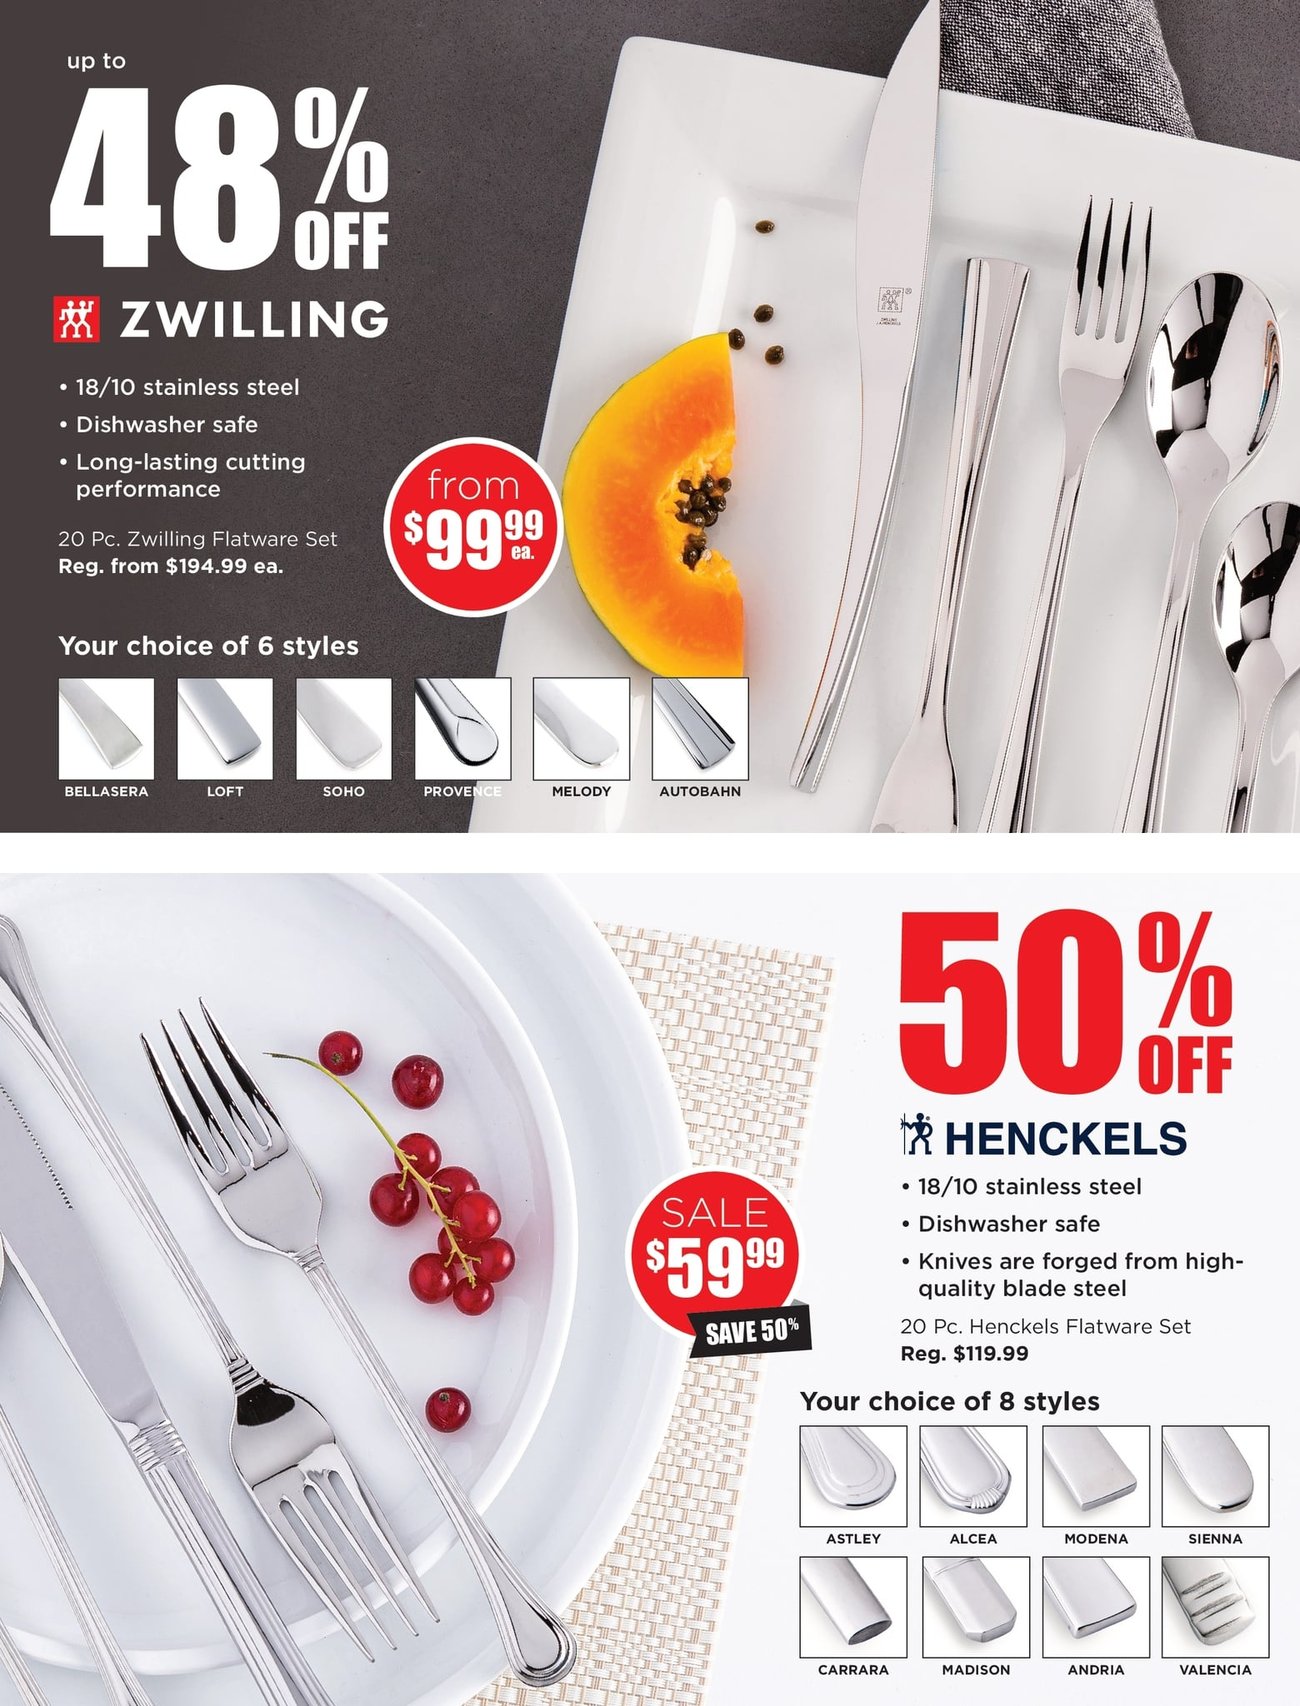 Kitchen Stuff Plus - Everything Cooking Sale - Page 15